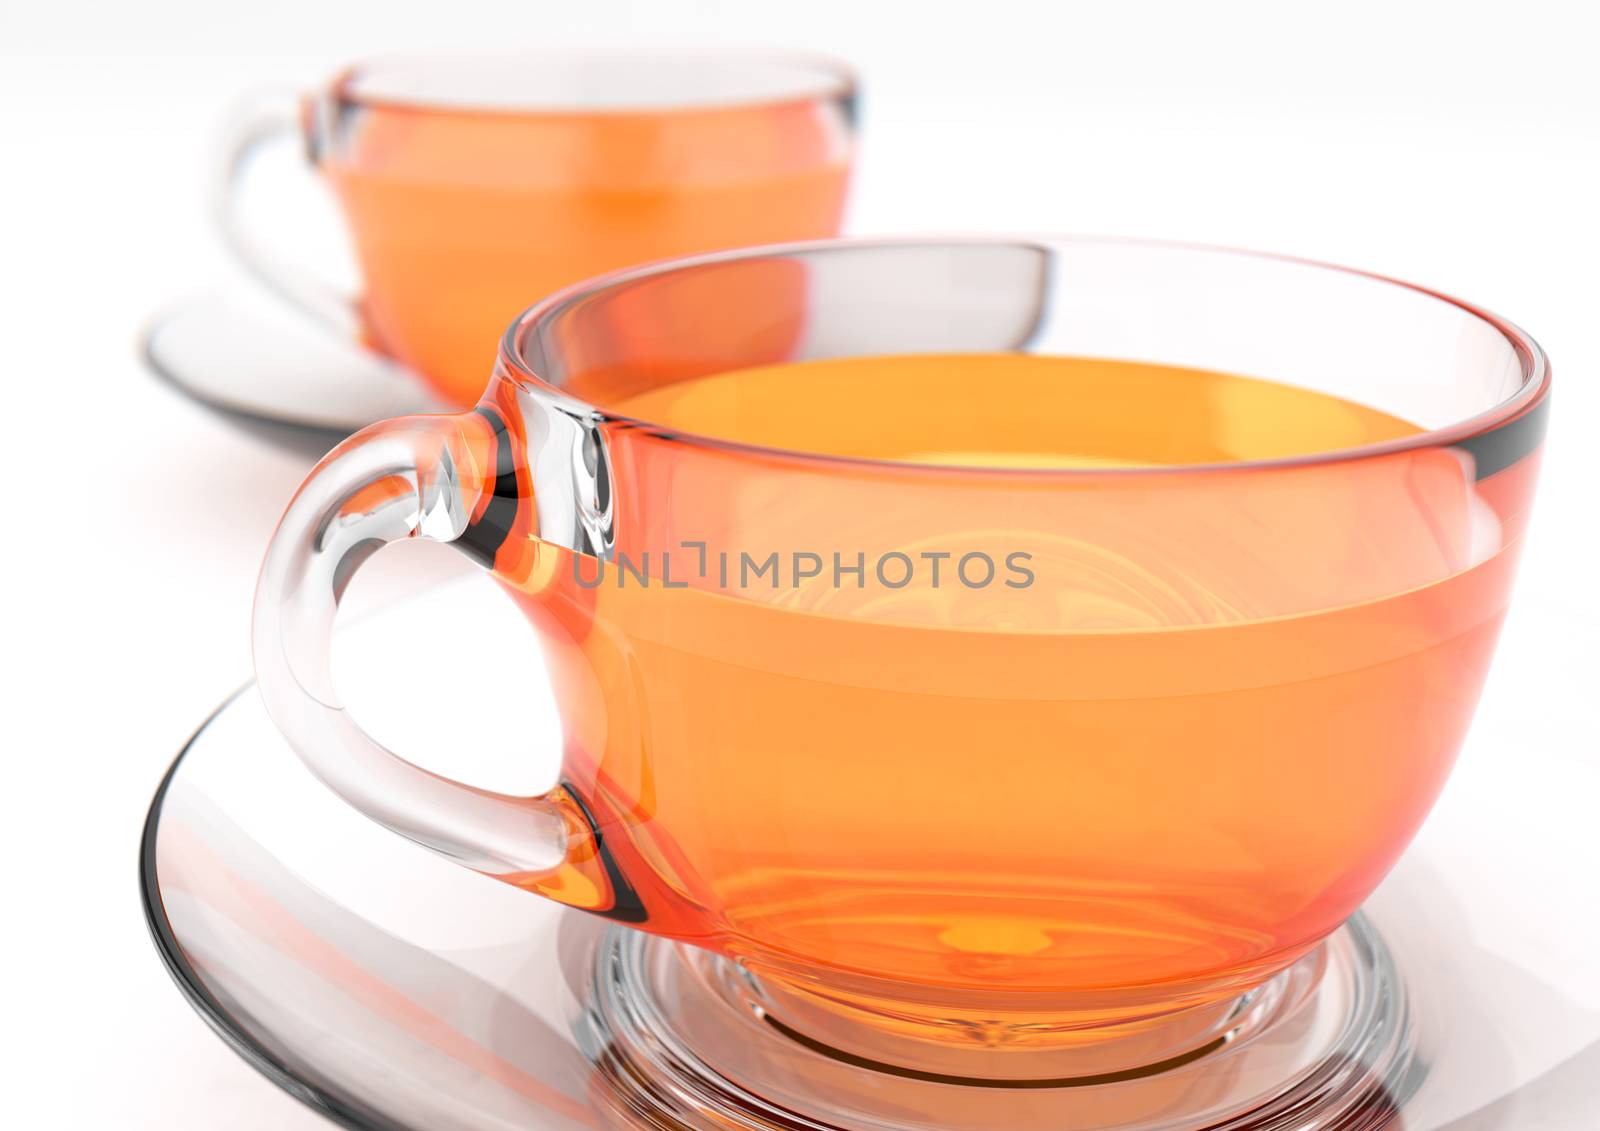 3D render of two see through glass teacups containing tea without milk